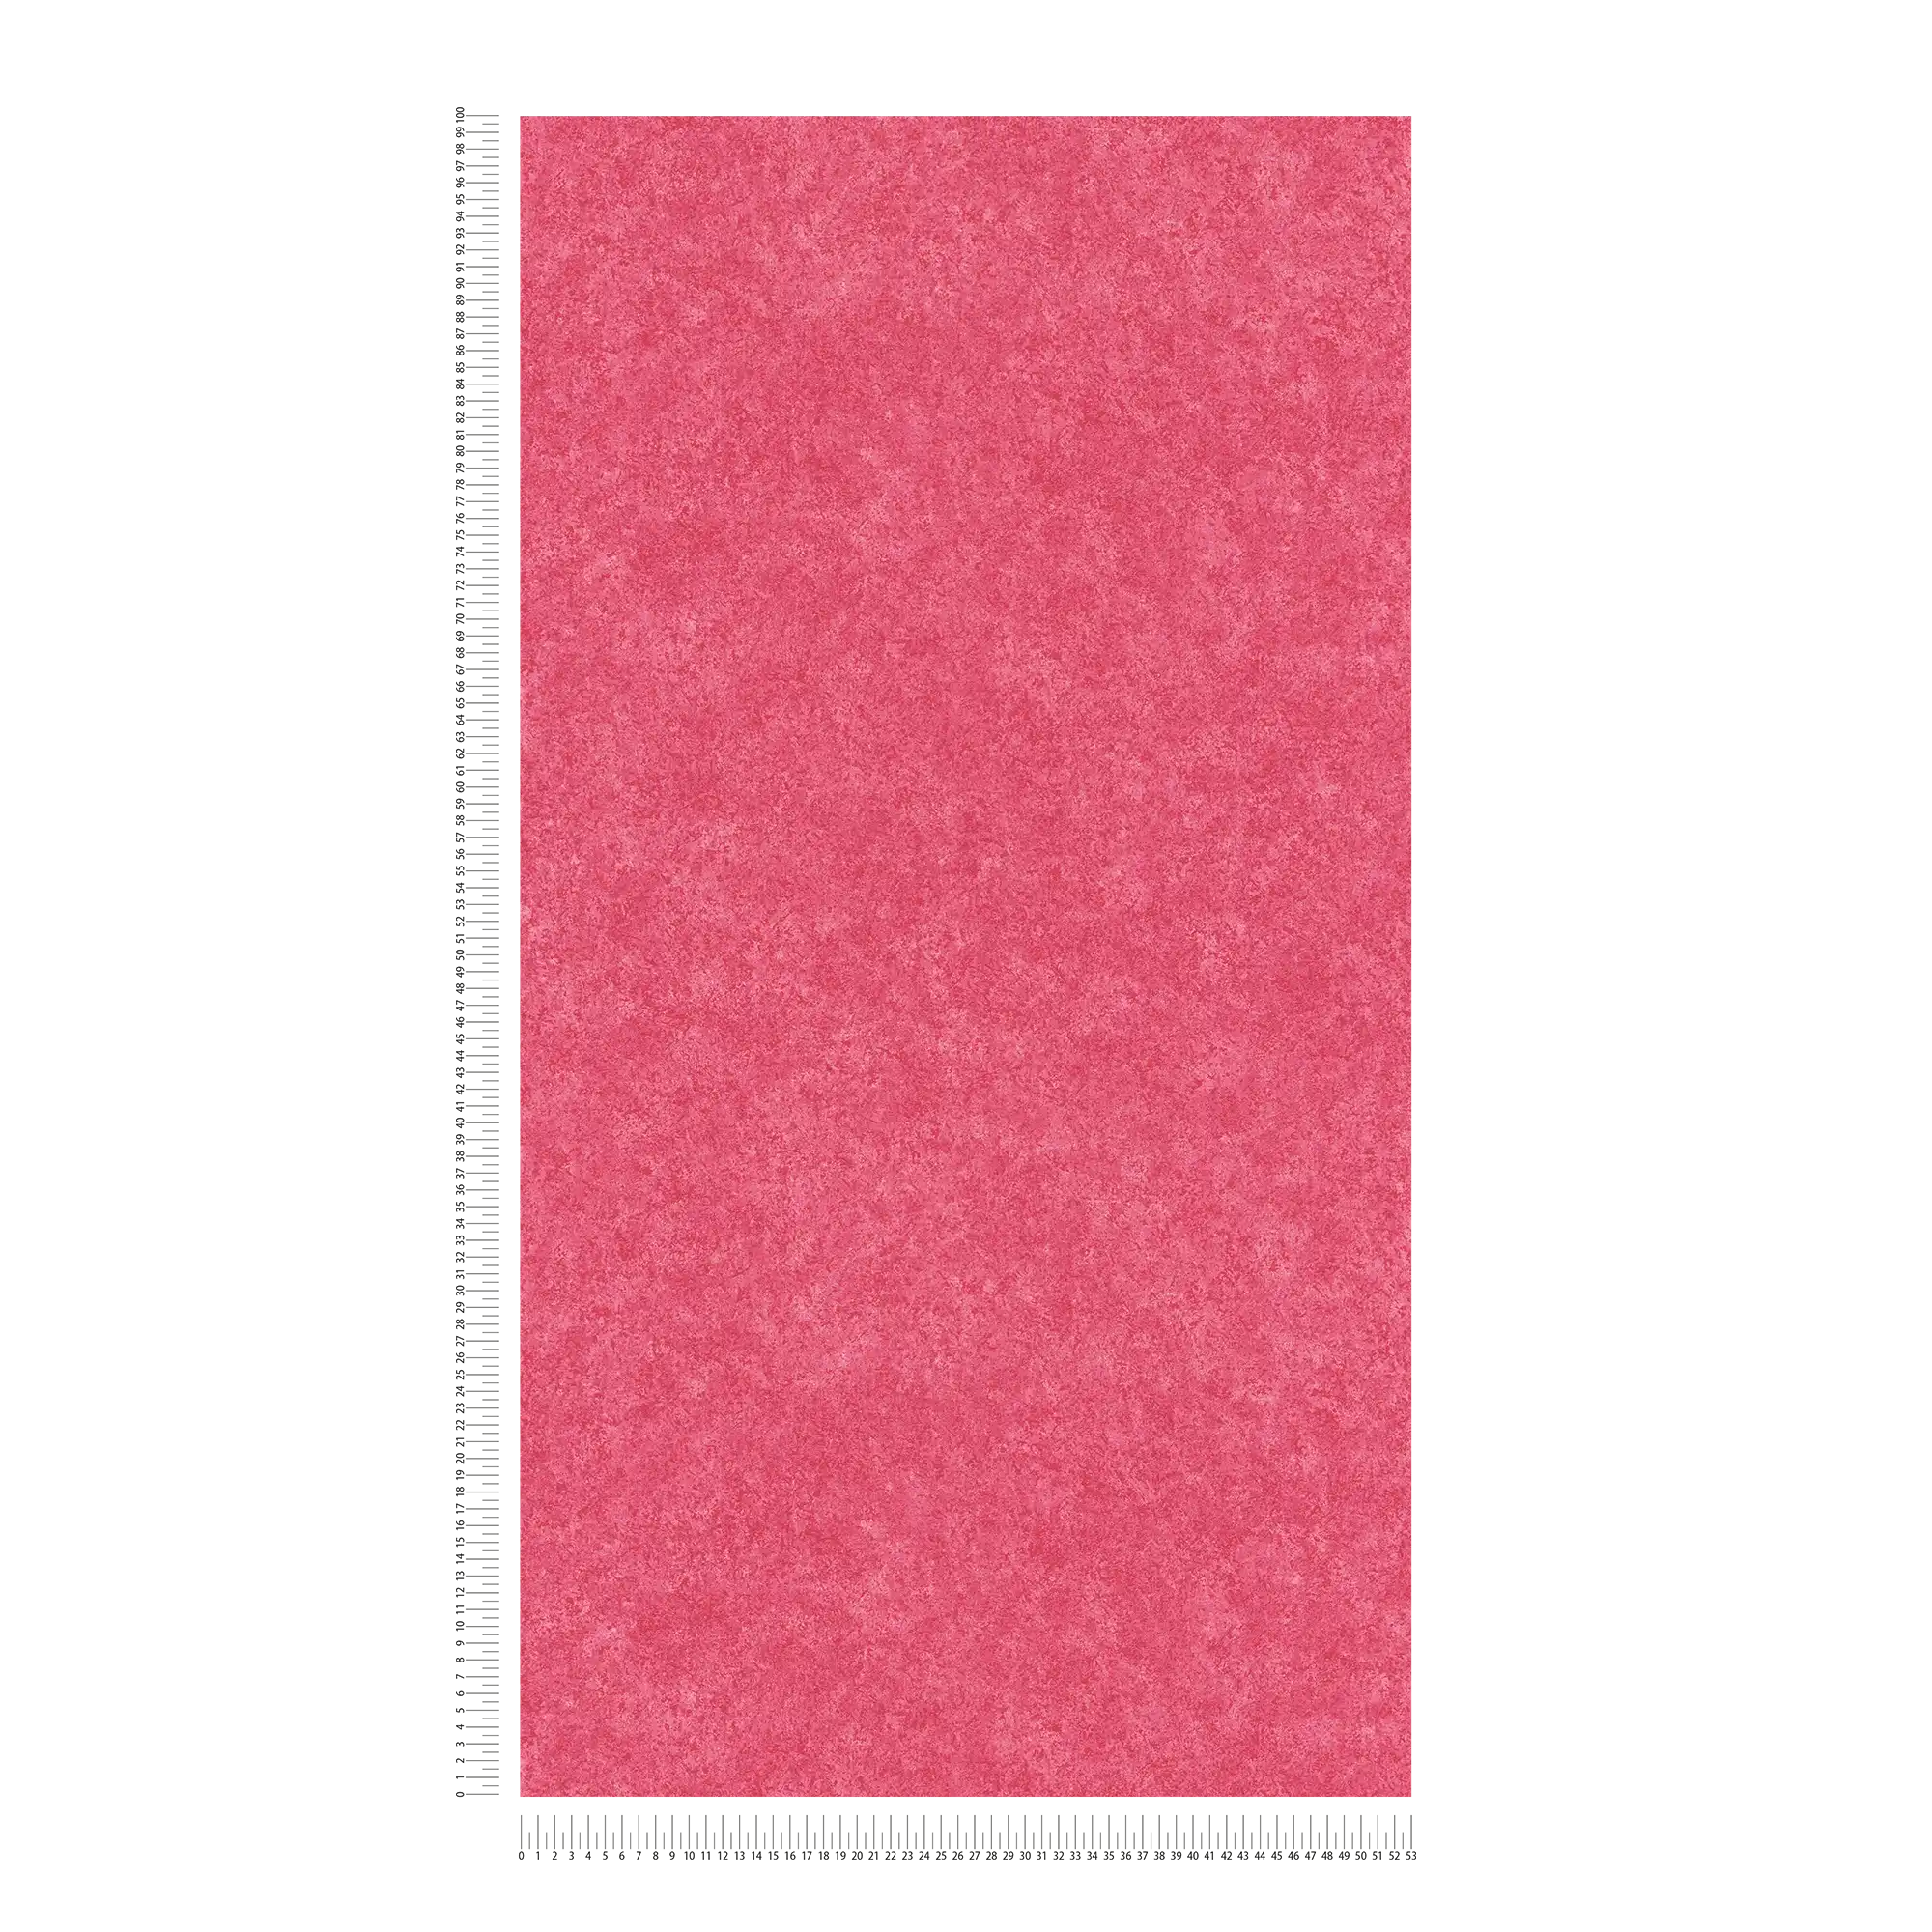             Pink non-woven wallpaper with mottled plaster look - red
        